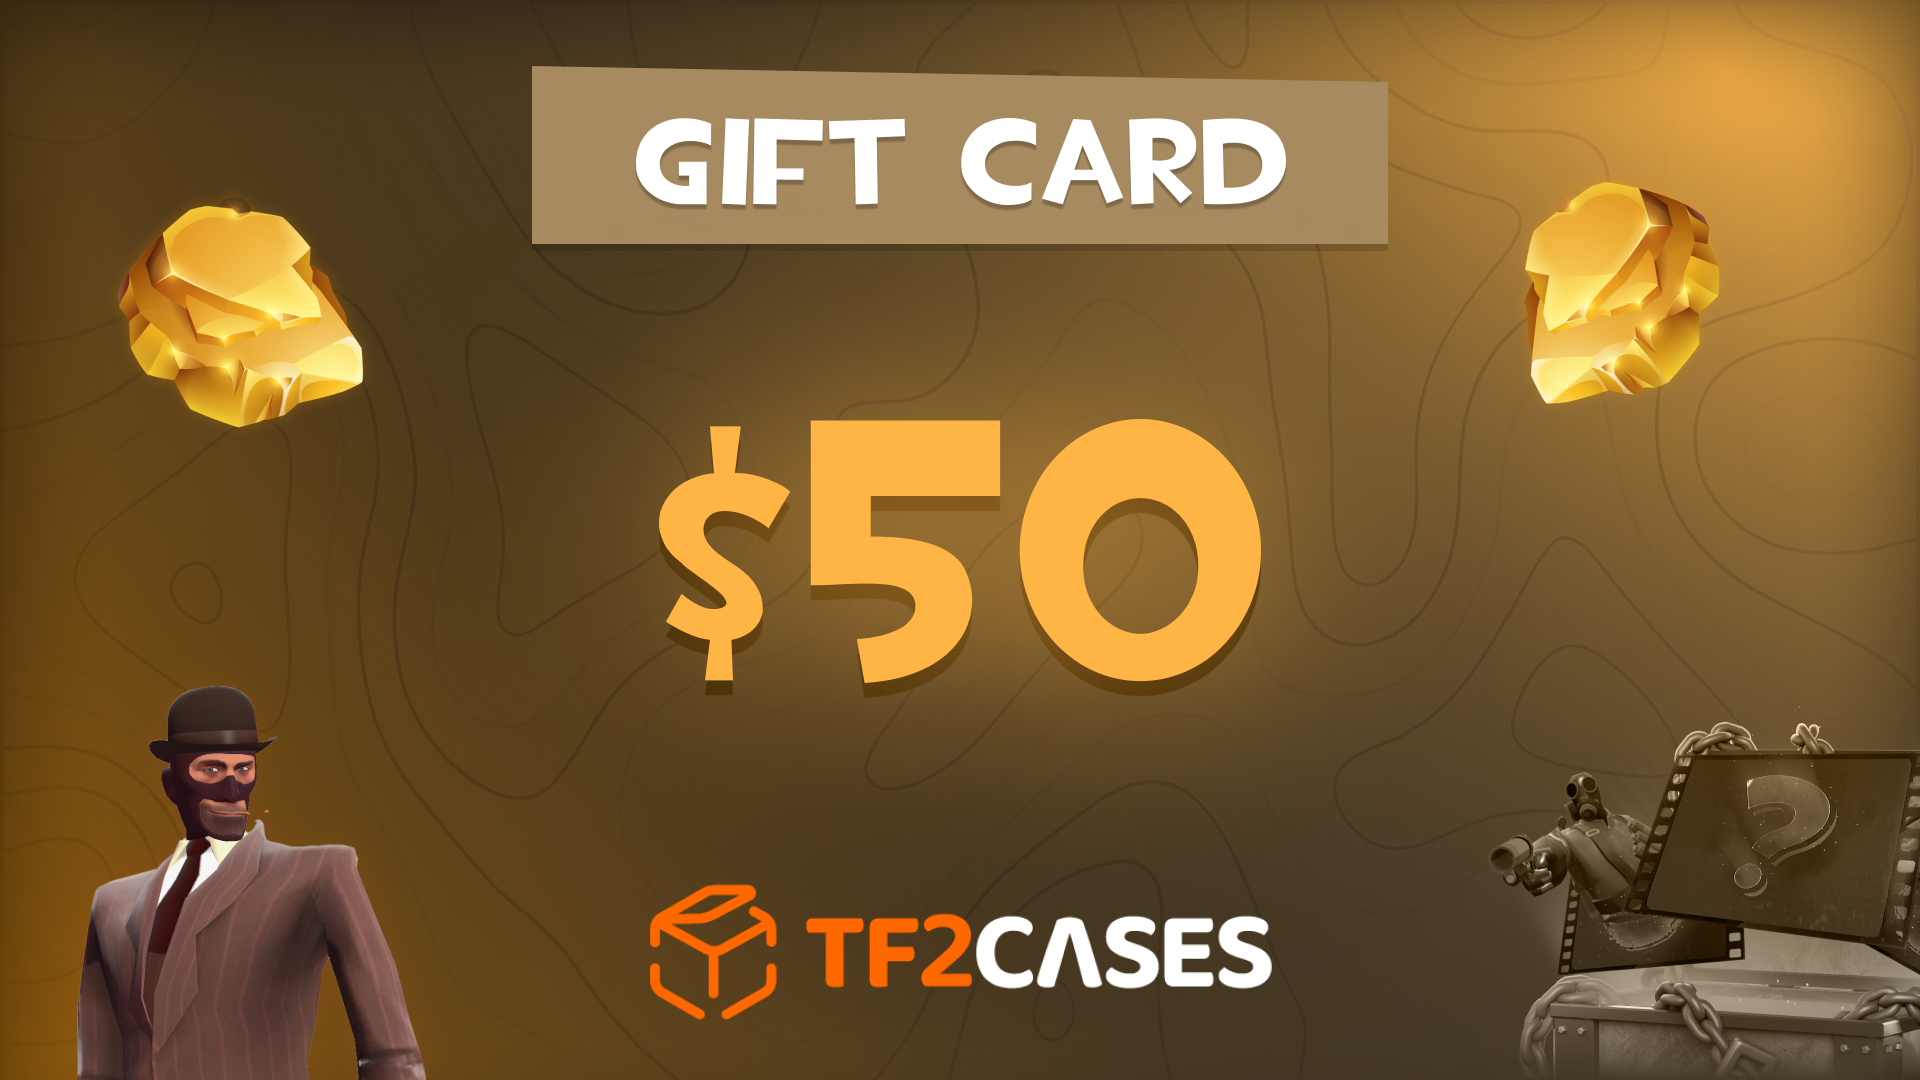 TF2CASES.com $50 Gift Card